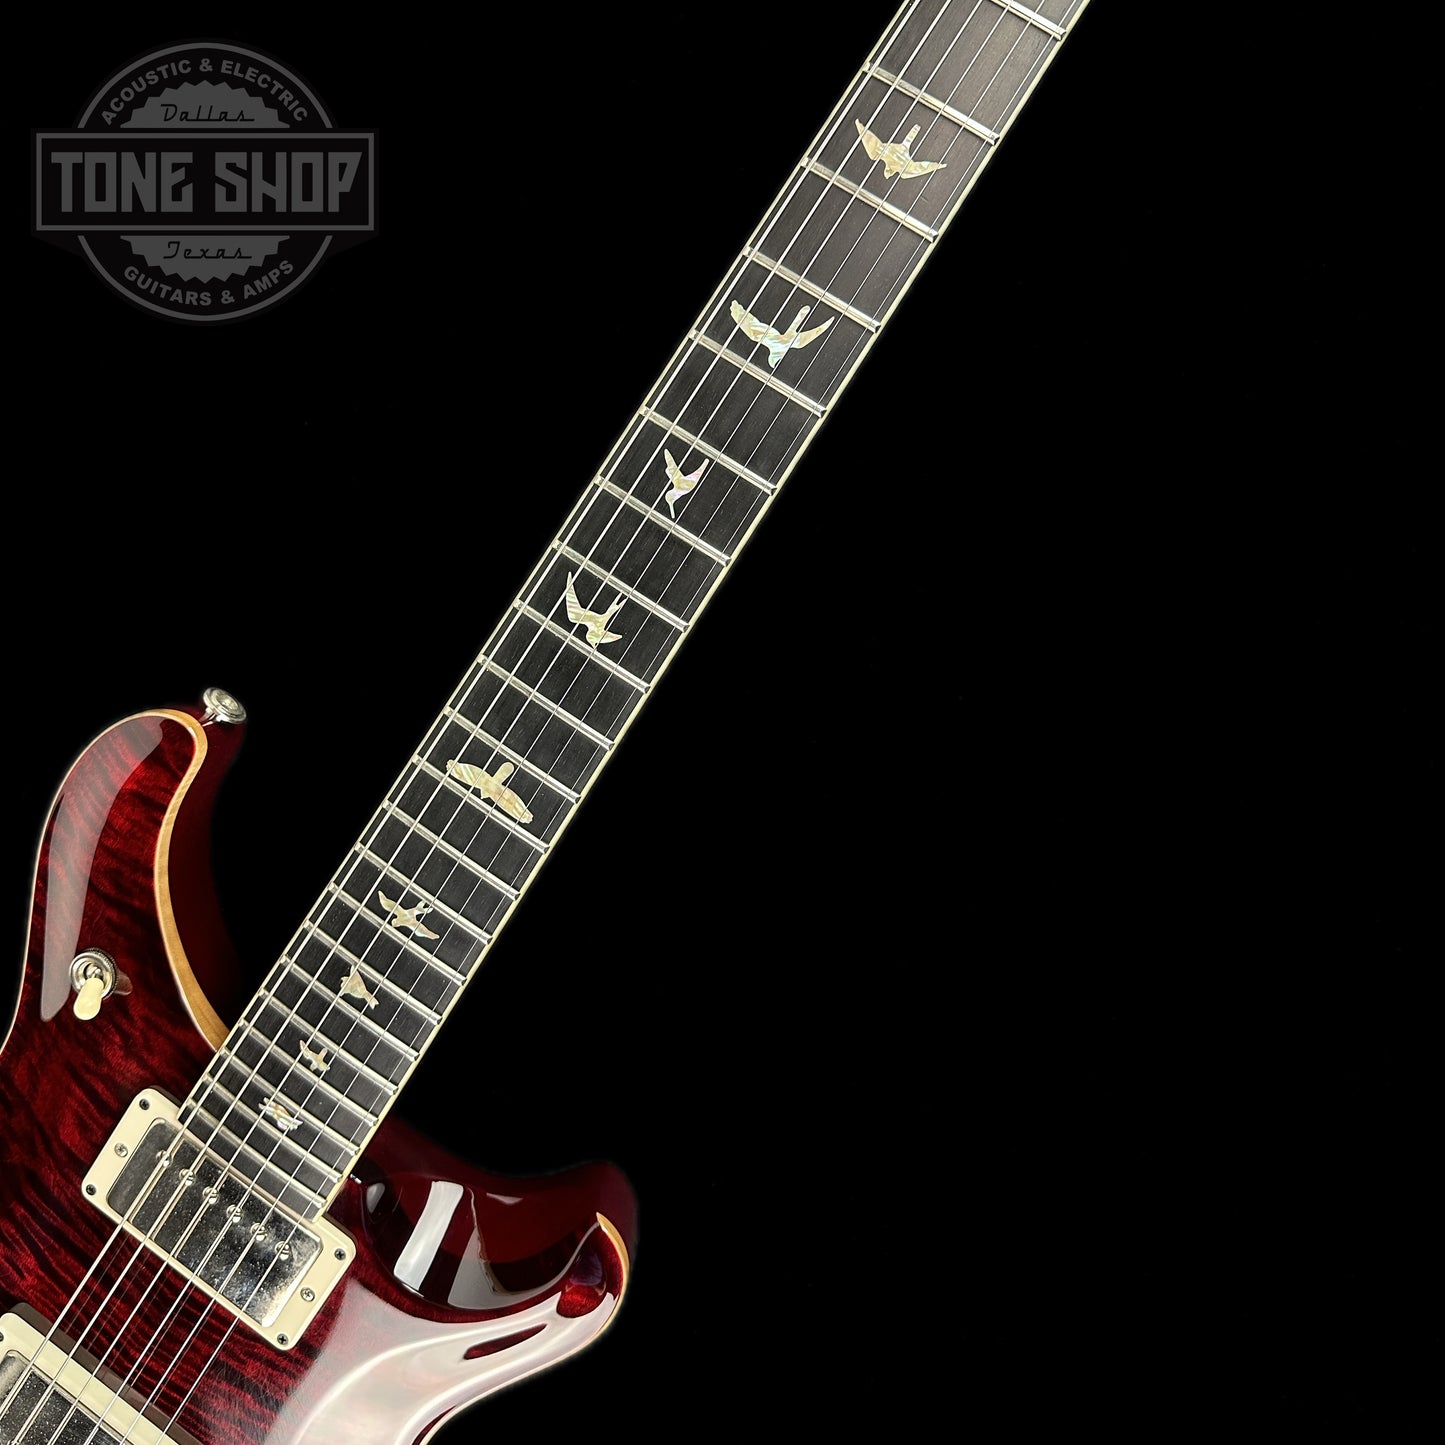 Fretboard of Used 2019 PRS McCarty 594 Scarlet.